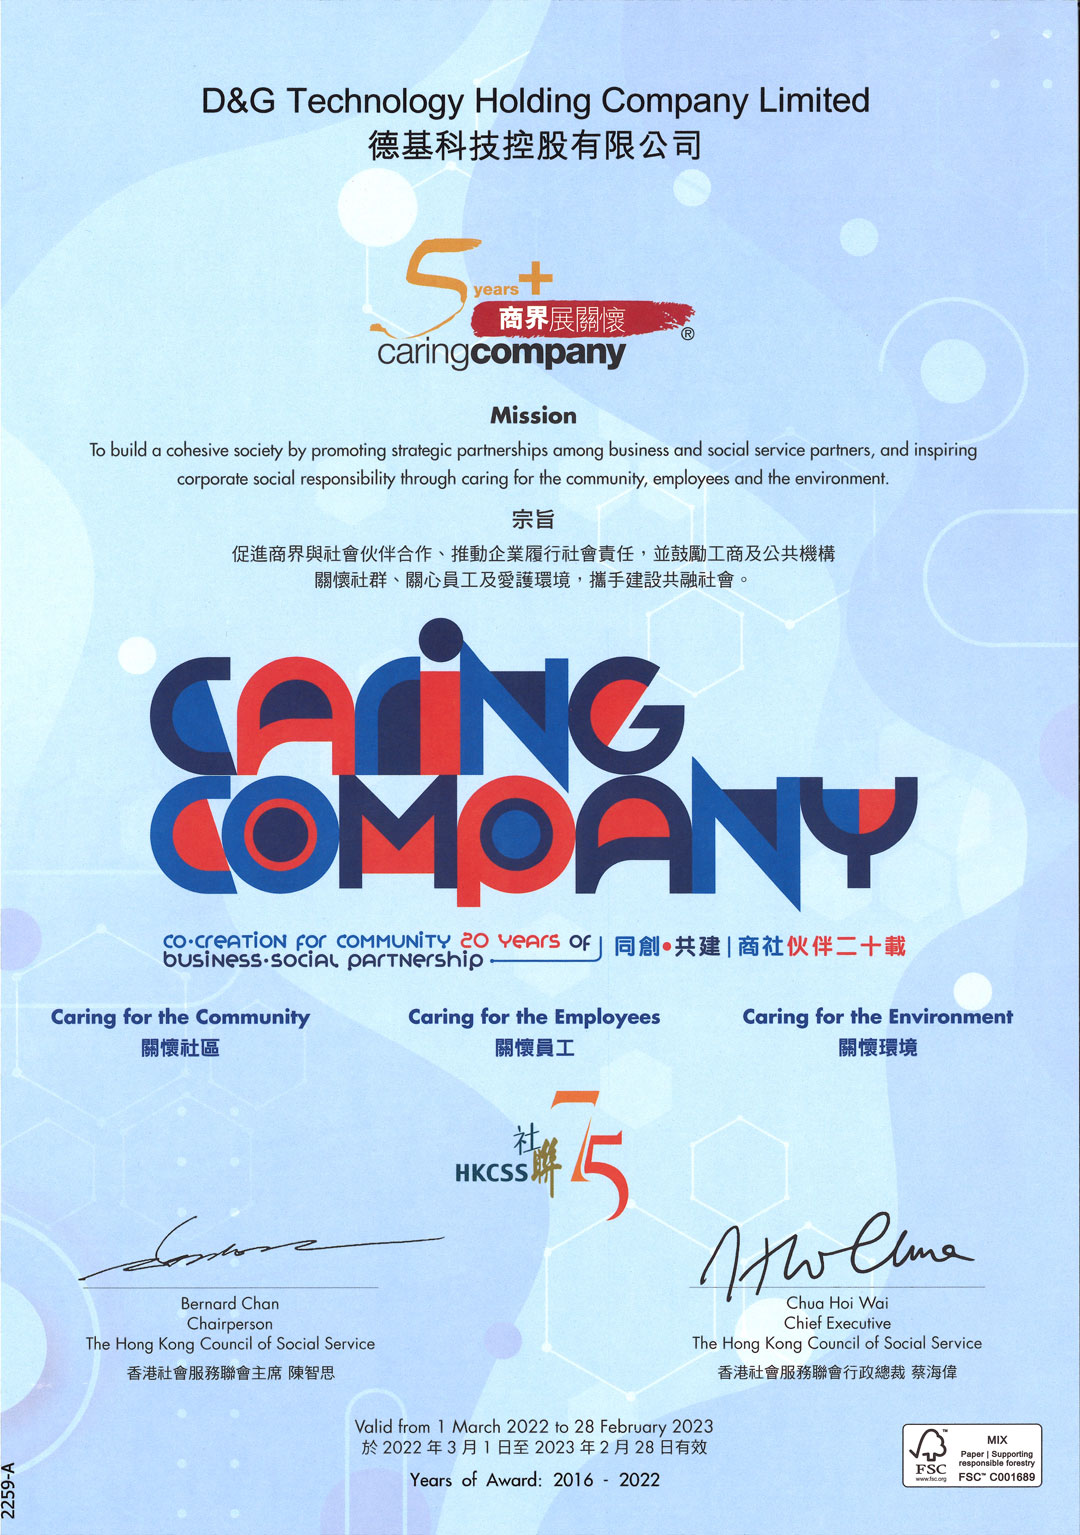 D&G Technology was awarded the 5 Years Plus Caring Company Logo again